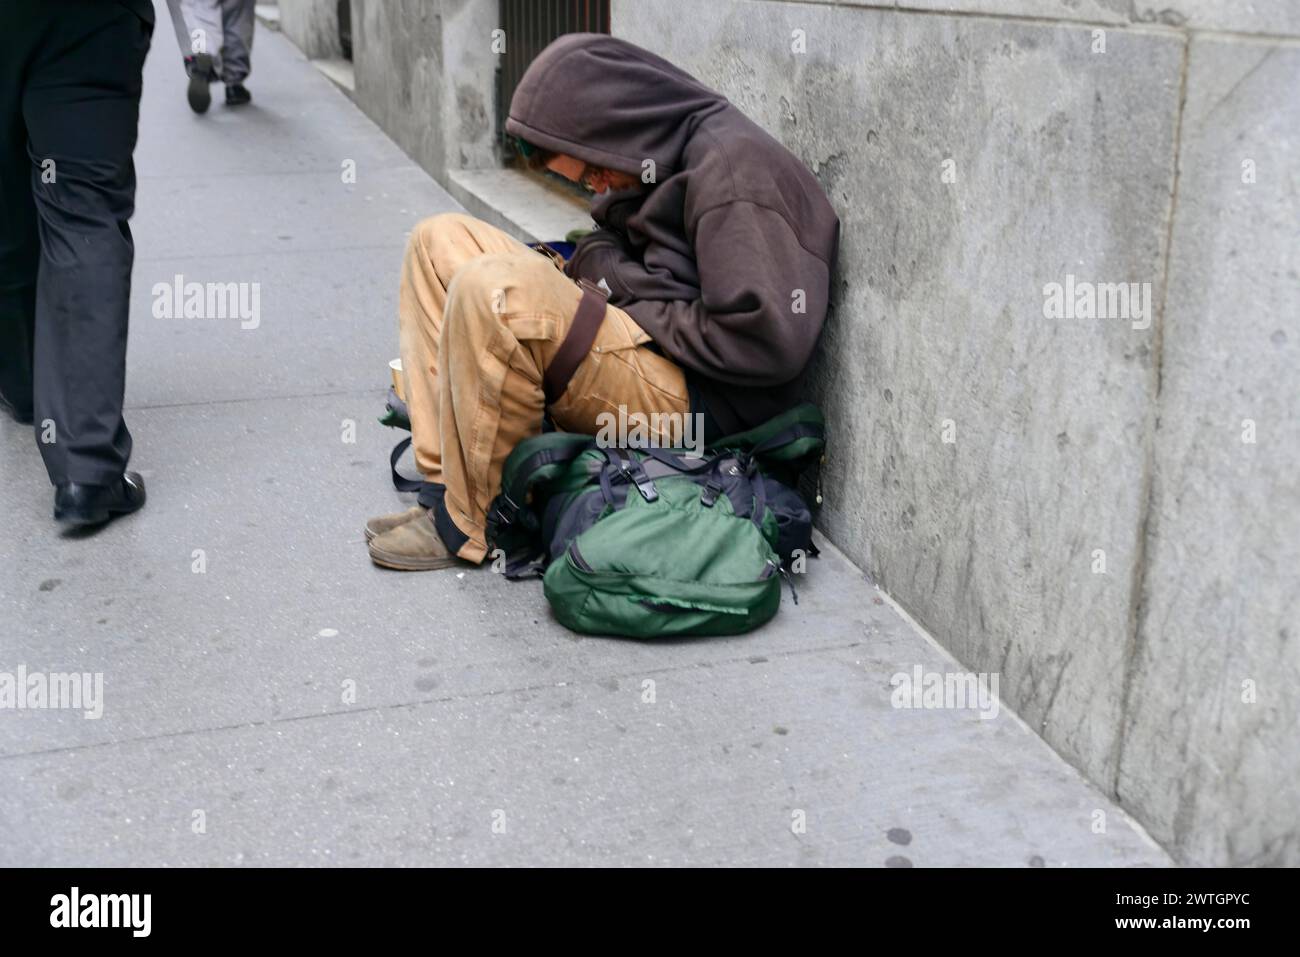 A homeless person sleeps curled up on a pavement with a green rucksack next to him, Manhattan, New York City, New York, USA, North America Stock Photo